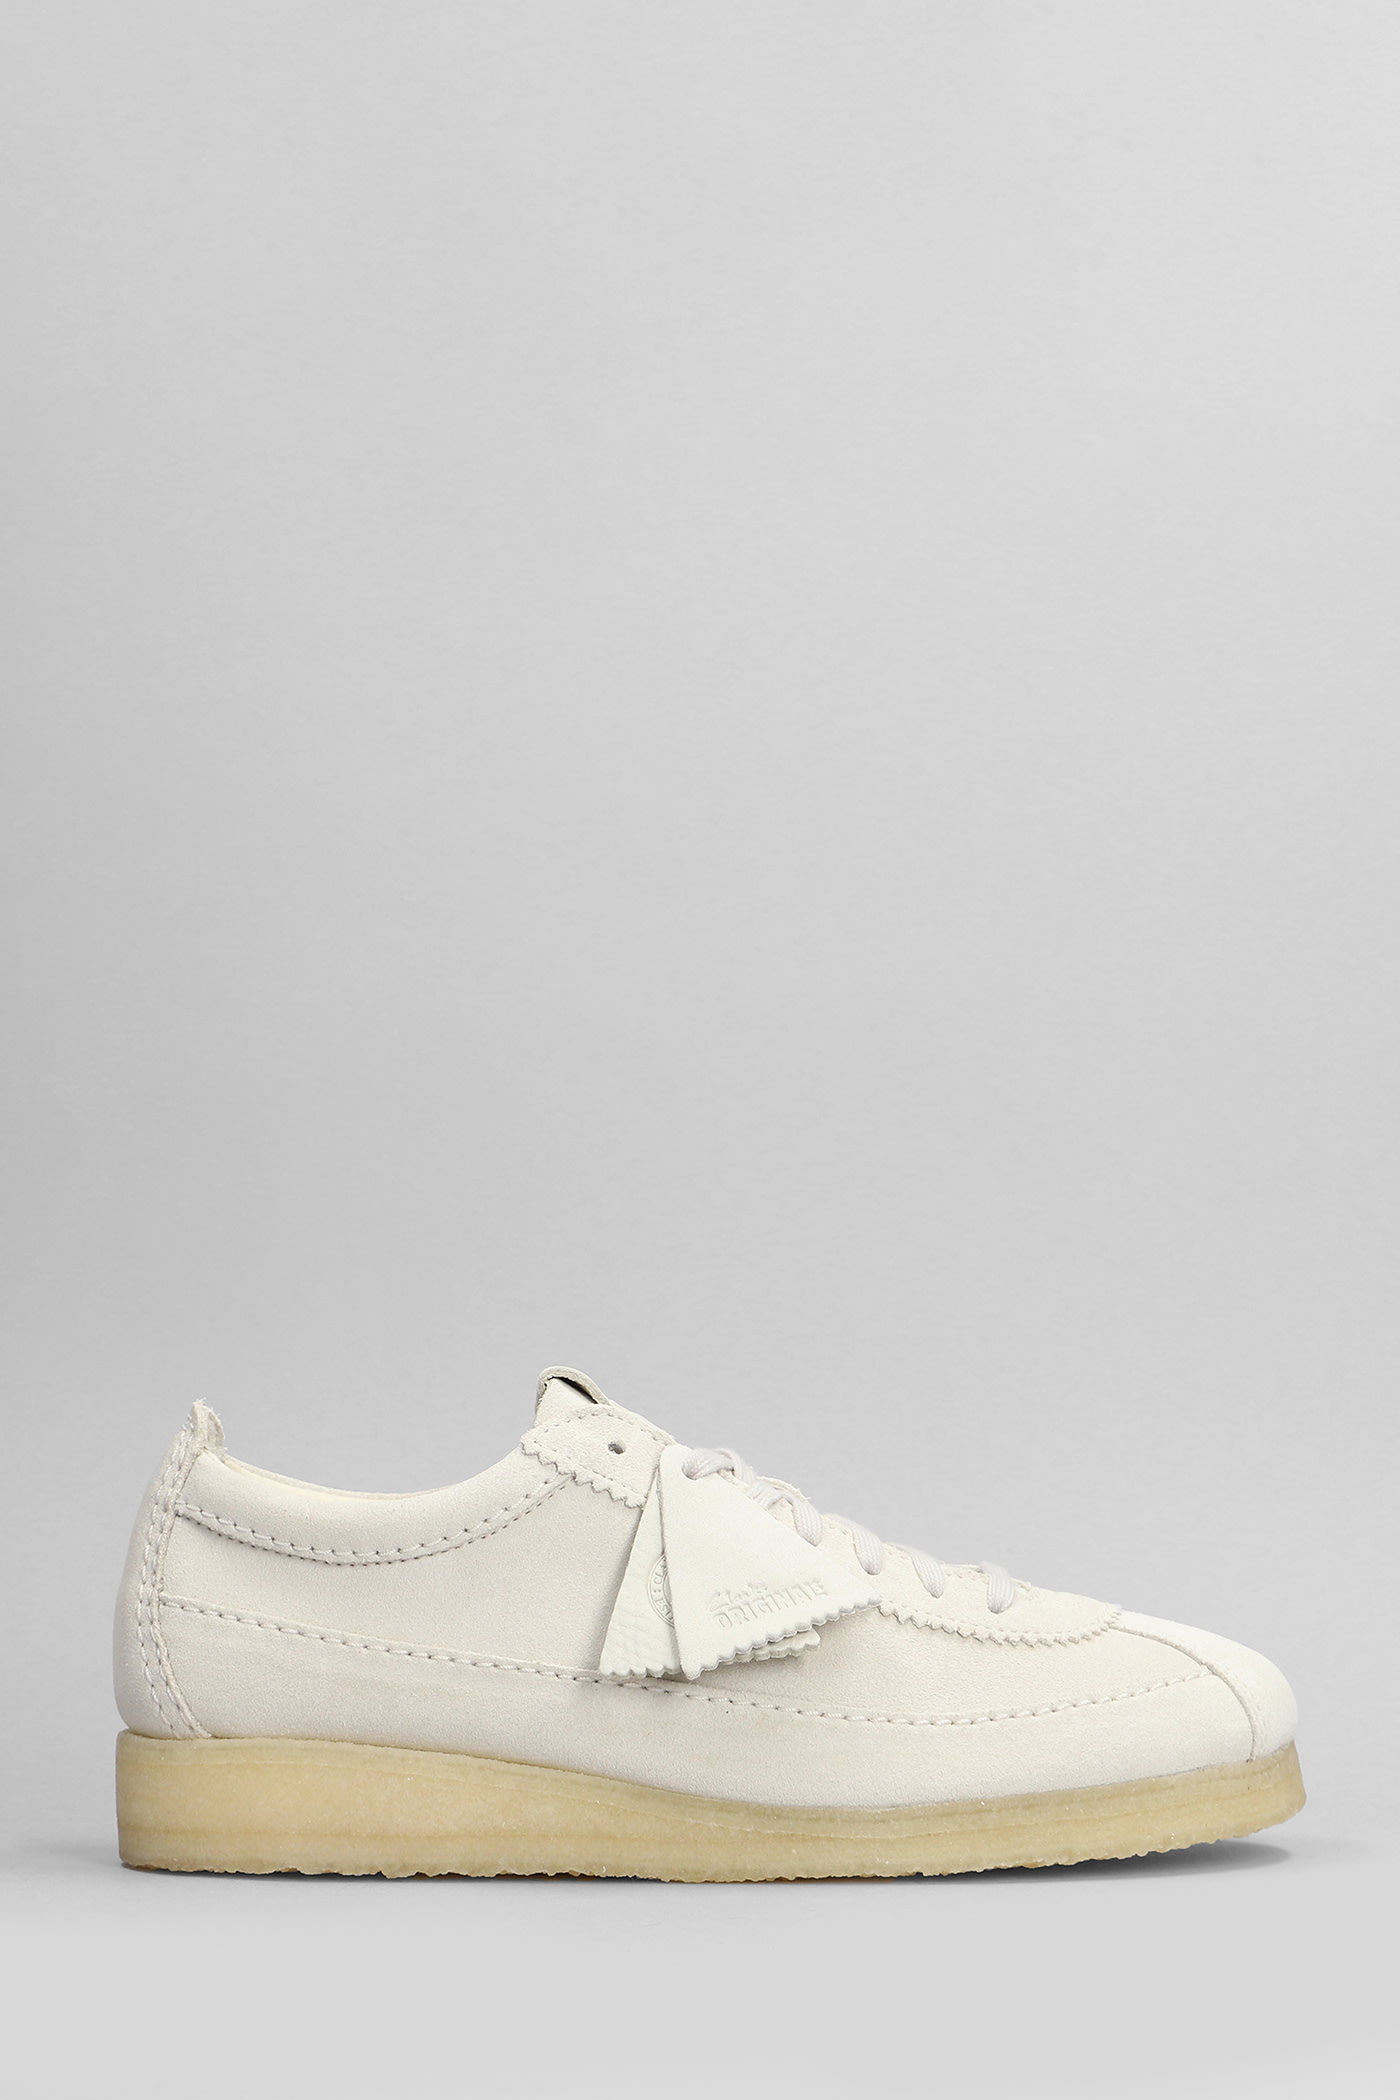 Wallabee Tor Lace Up Shoes In White Suede